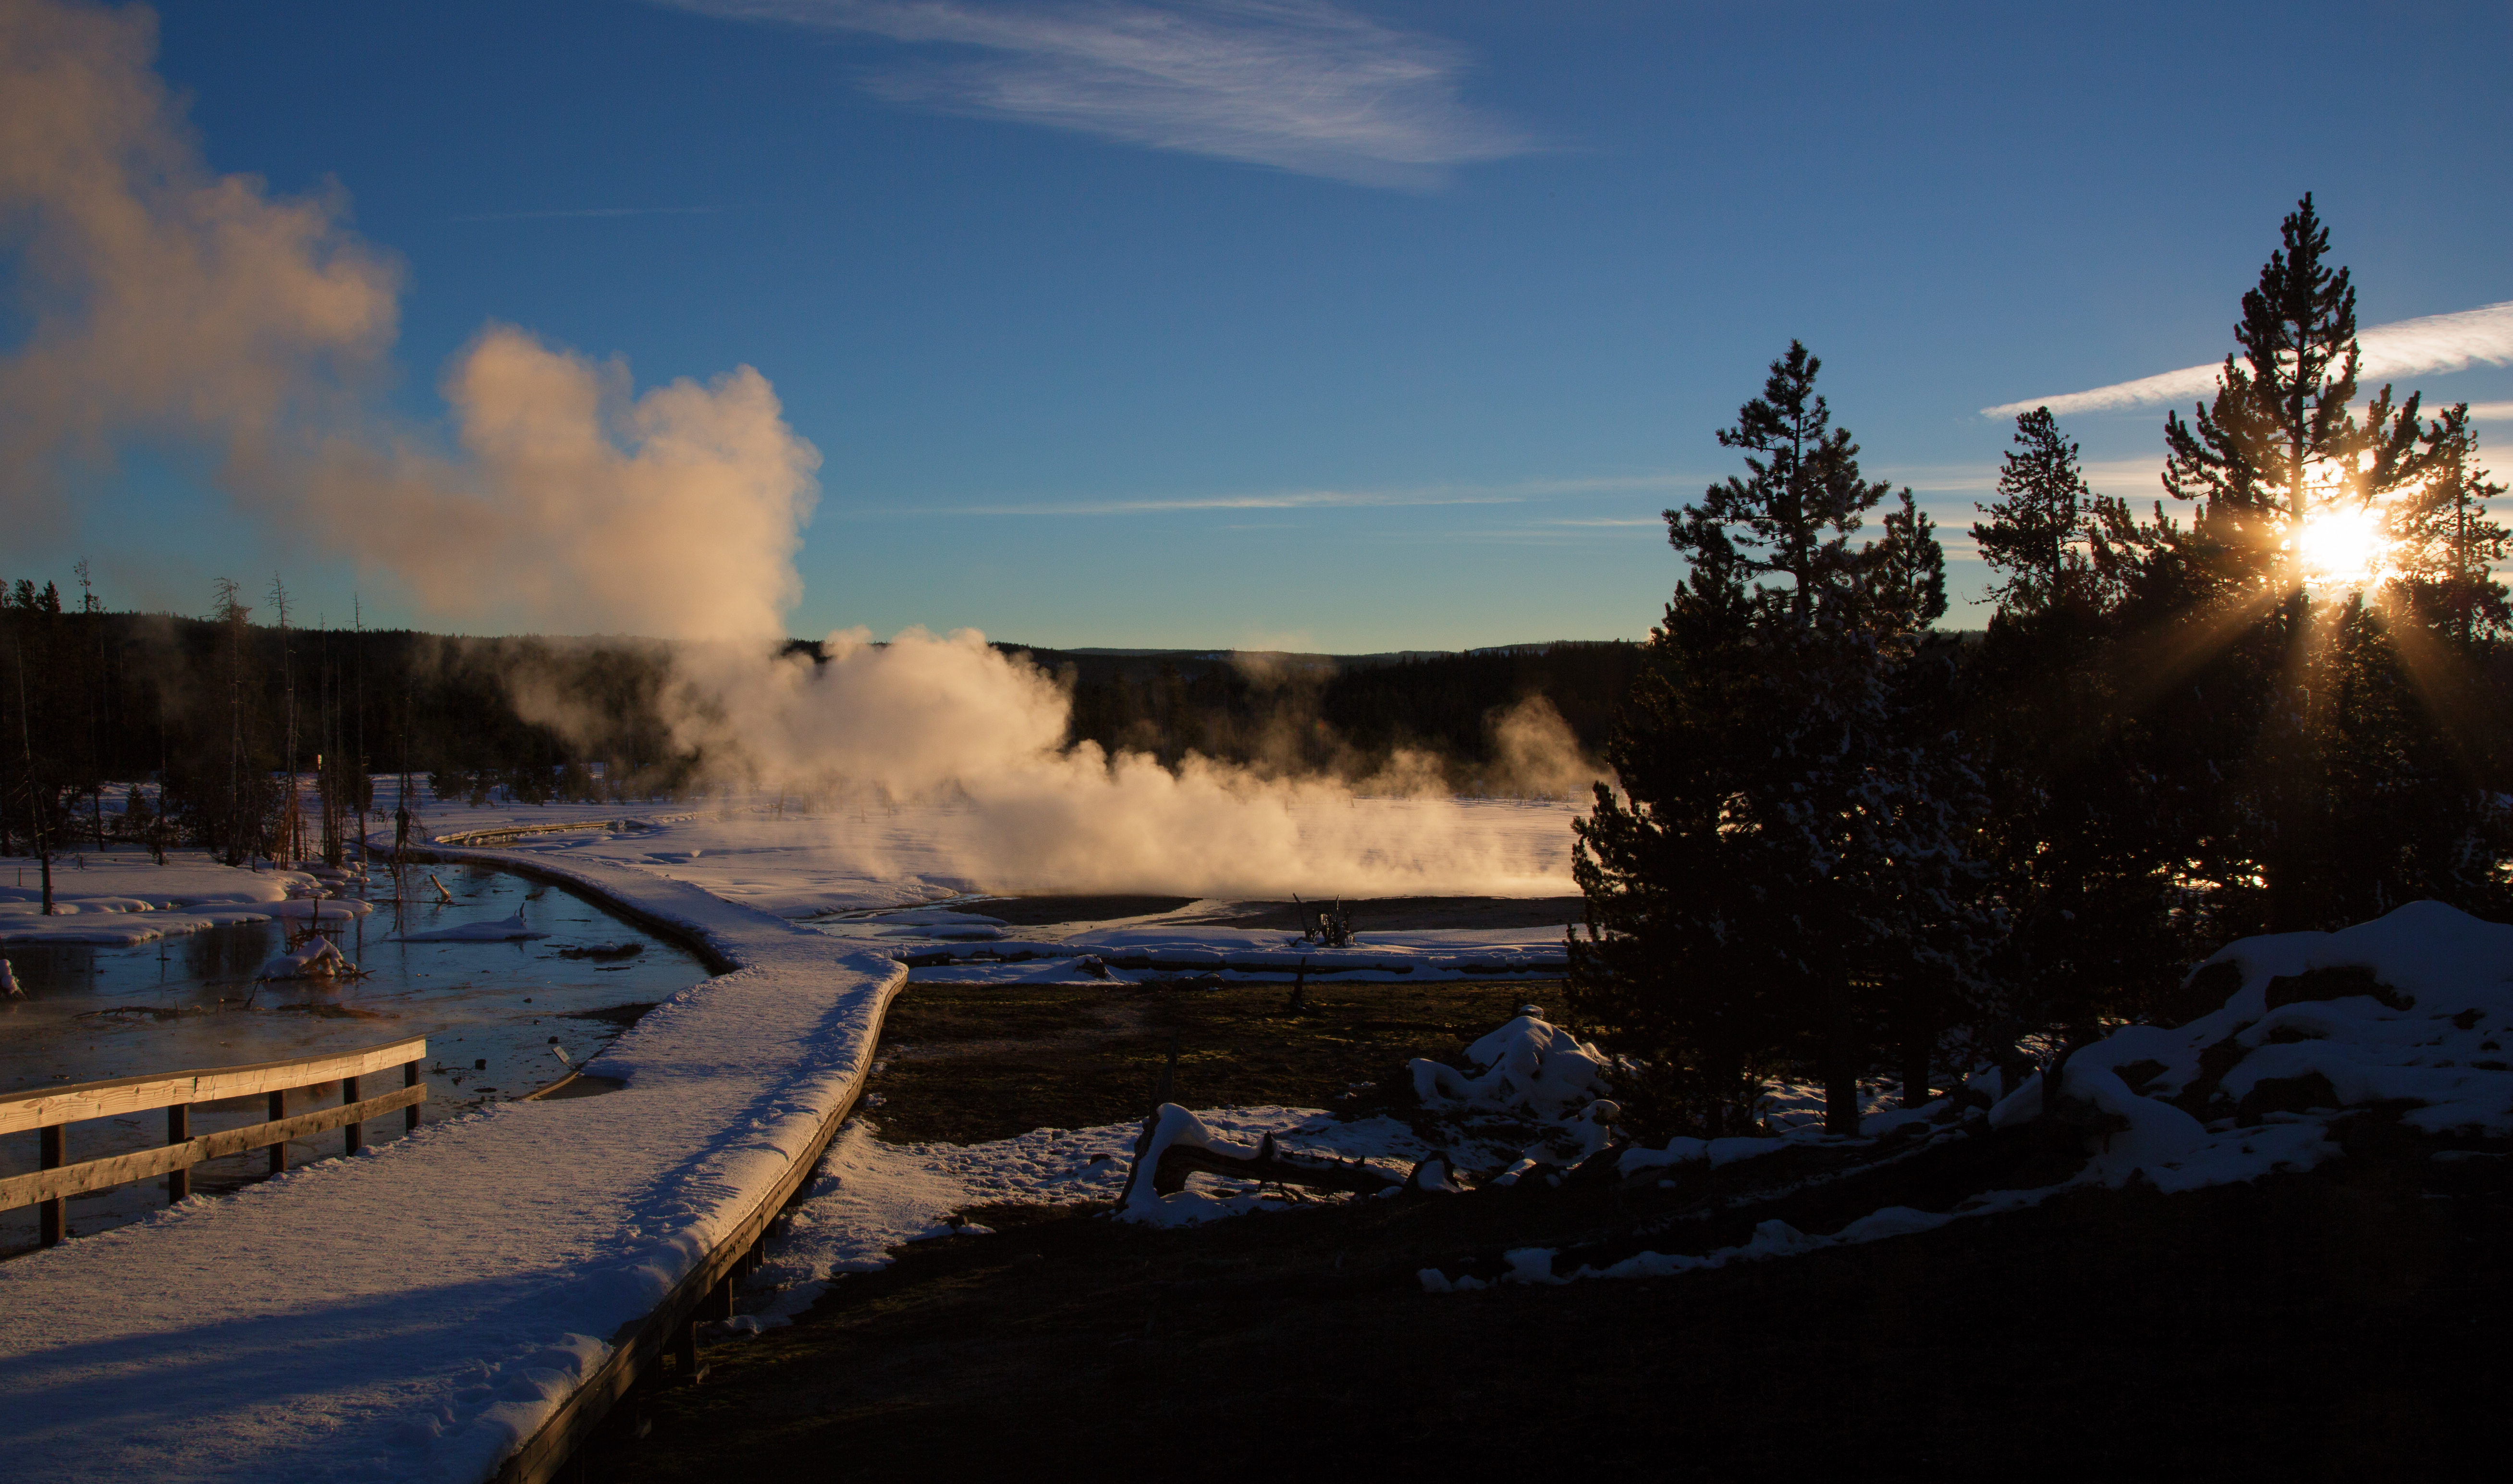 Sunset at the Lower Geyser Basin, Yellowstone National Park, WY